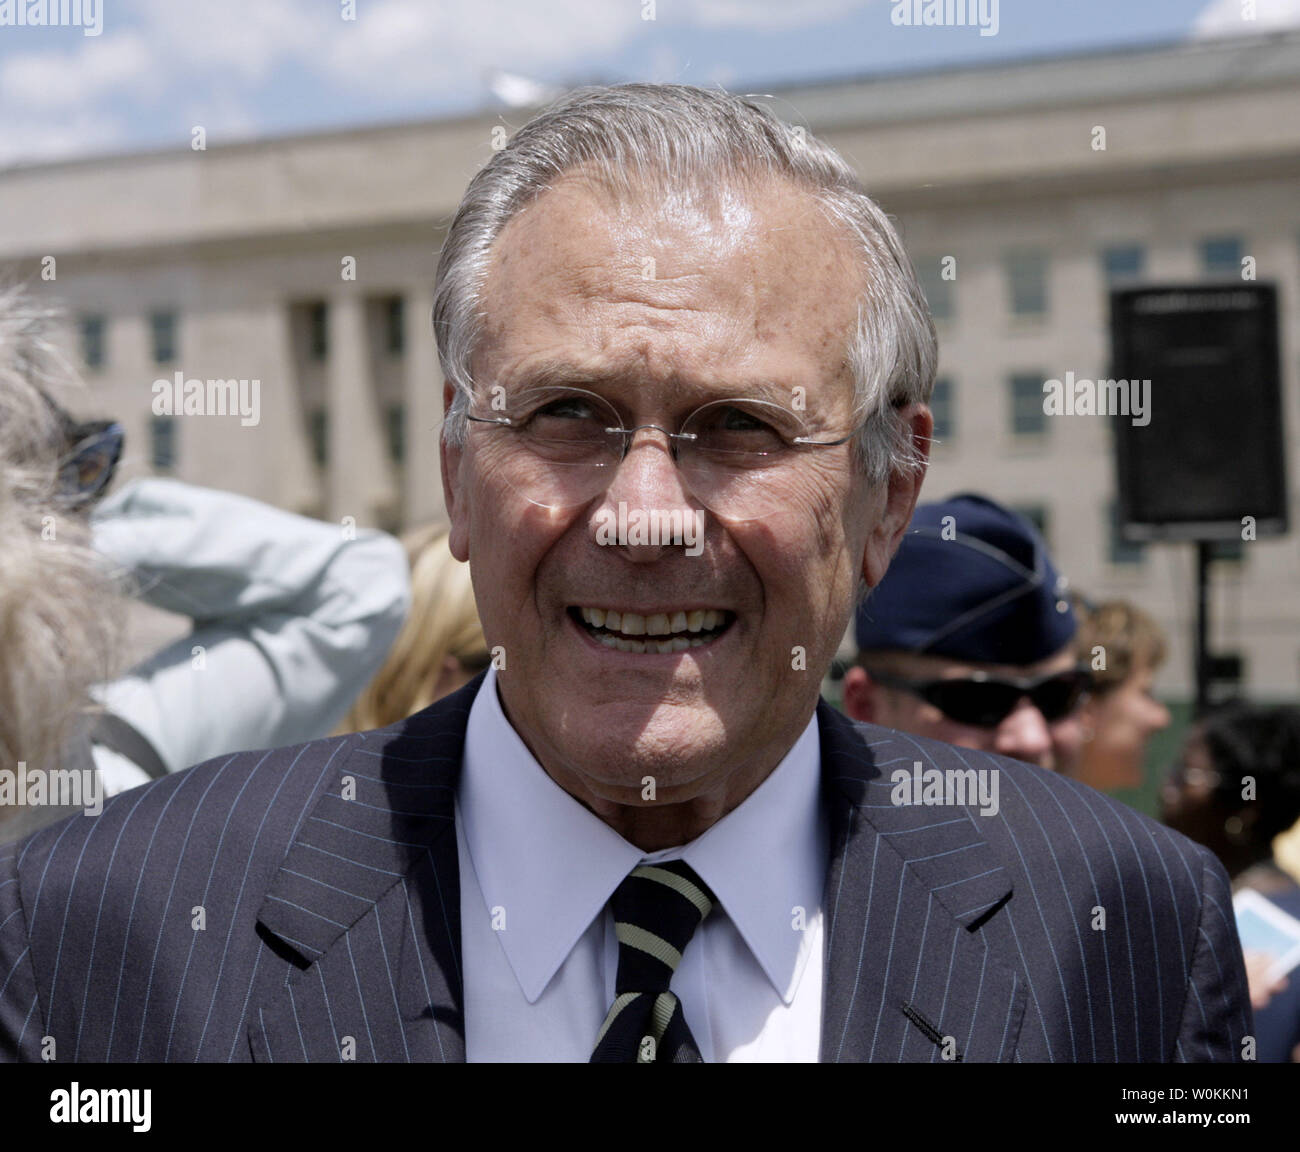 U.S. Defense Secretary Donald H. Rumsfeld leaves after a Memorial ground-breaking ceremony outside of the Pentagon in Washington on June 15, 2006. The Pentagon Memorial will commemorate the 184 innocent lives lost in the Pentagon and on American Airlines Flight 77 on September 11, 2001. (UPI Photo/Yuri Gripas) Stock Photo